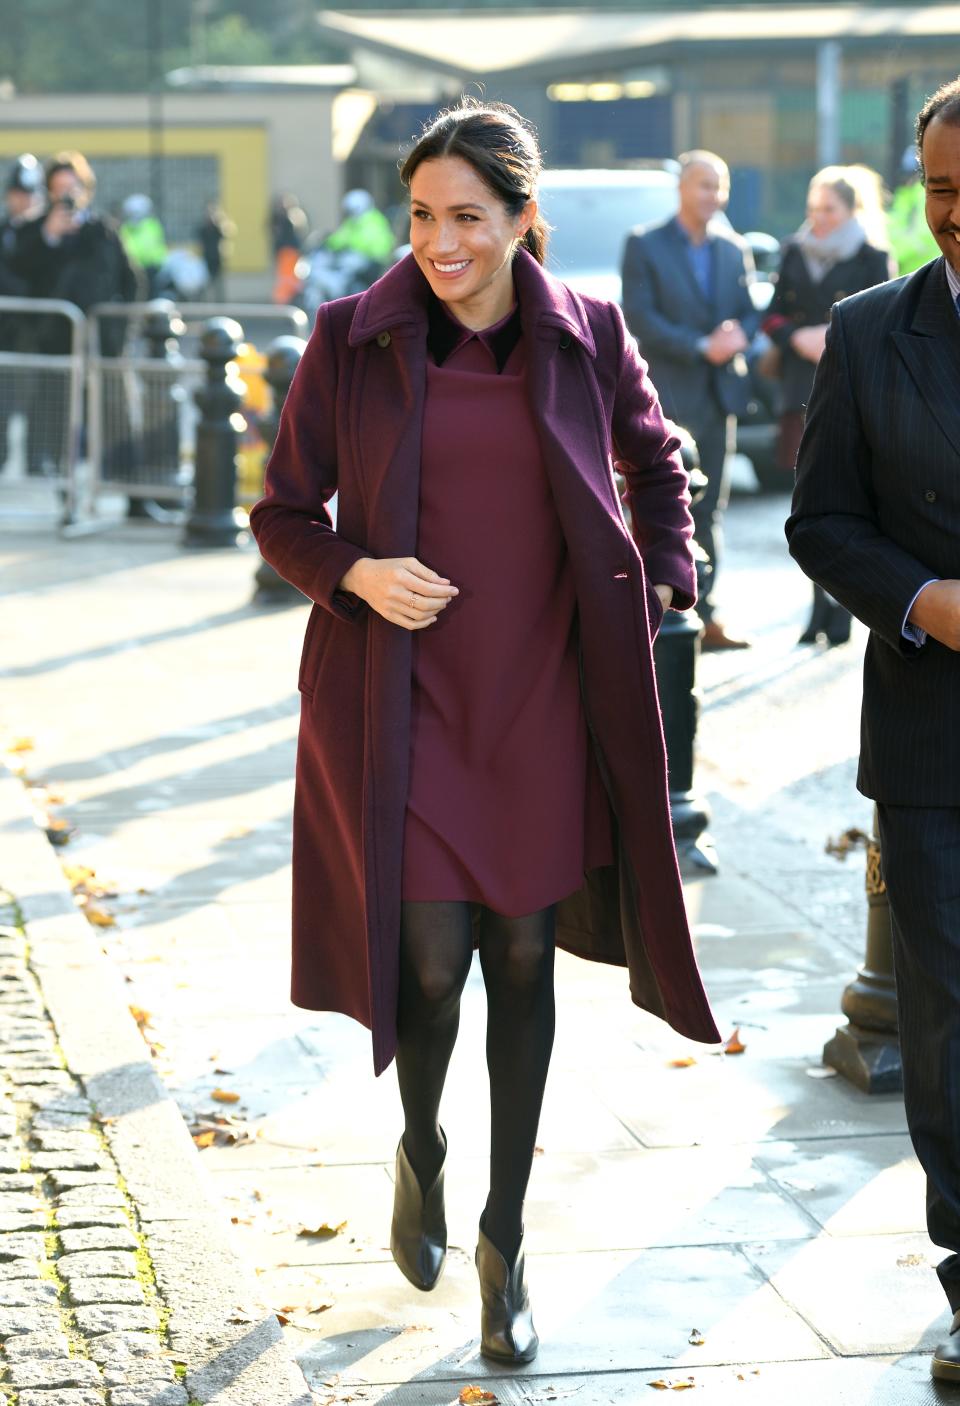 For an unexpected solo visit to the Hubb Community Kitchen in November, Markle gave onlookers another instantly shoppable maternity fashion moment with a dress and coat by Club Monaco.